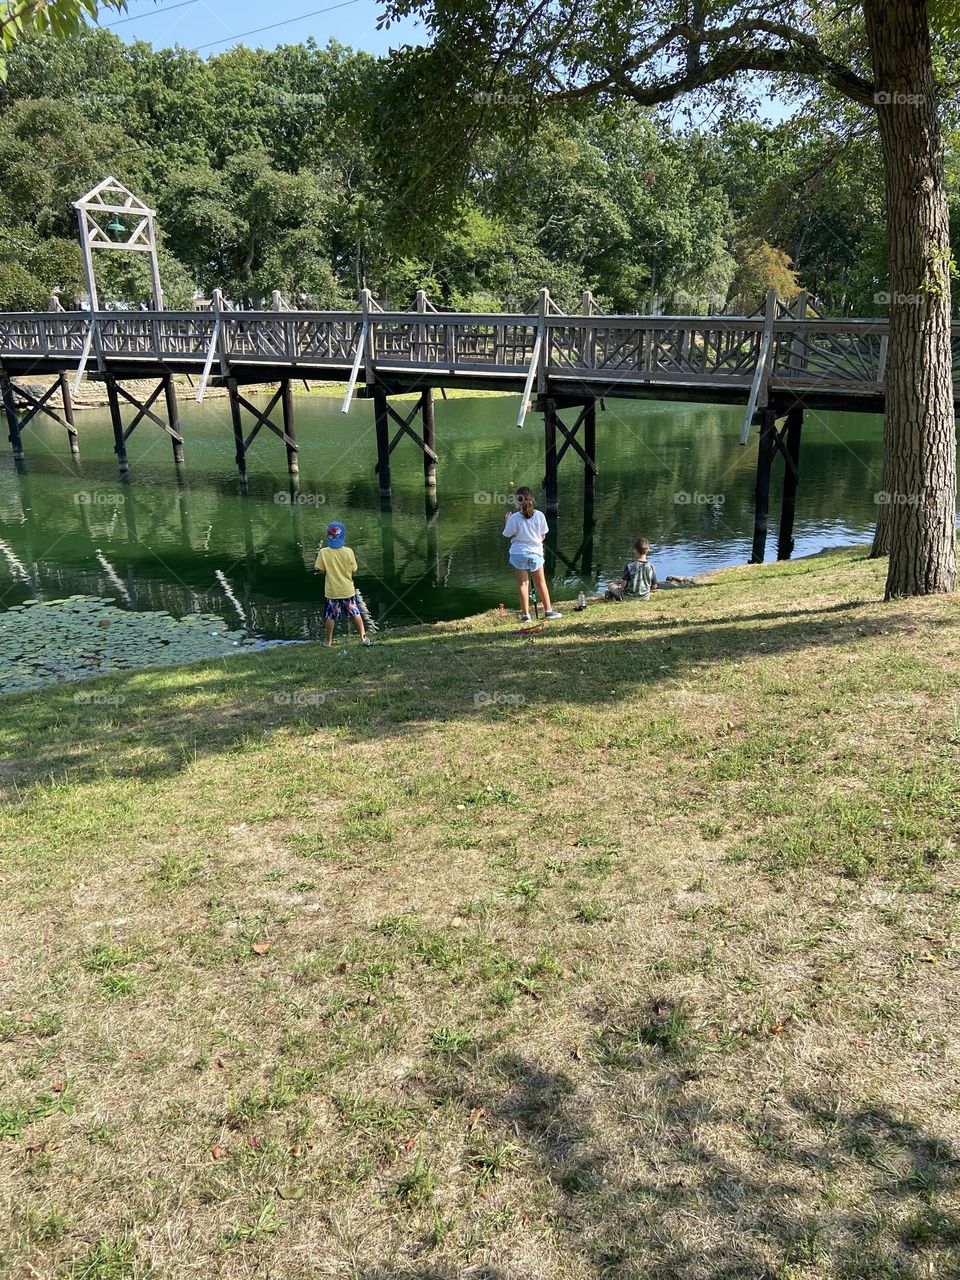 Children fishing in Divine Park in Spring Lake, NJ. Green grass is in the foreground and green trees are in the background. The bridge over the water leads to beautiful walking paths. 